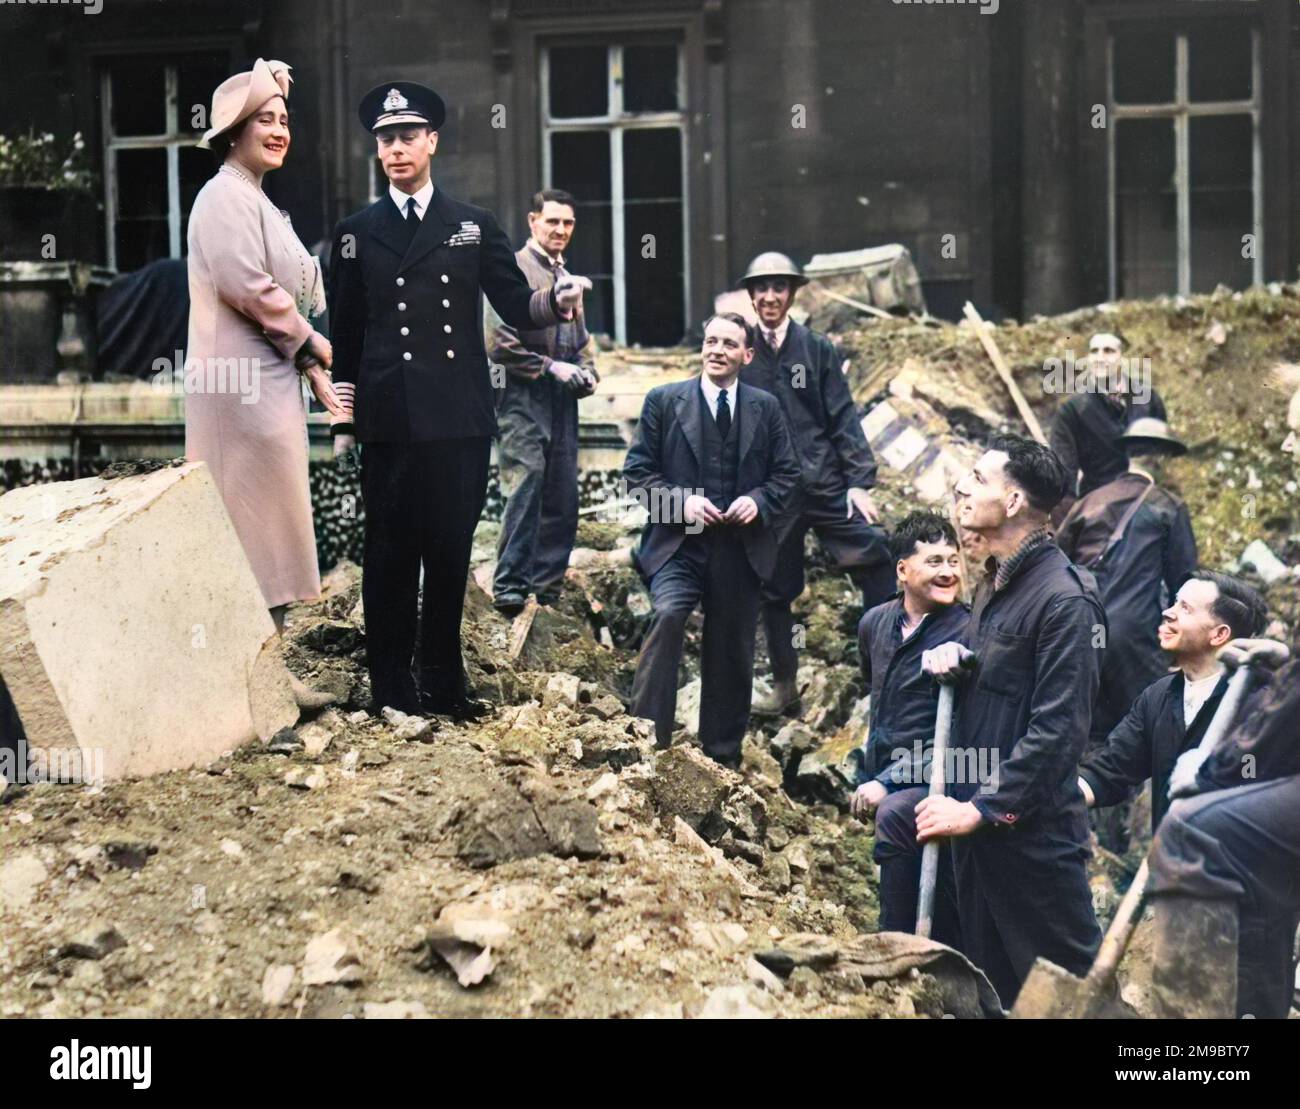 King George VI and Queen Elizabeth pictured among the rubble at Buckingham Palace following German air raids during the Blitz, September 1940.  The Palace suffered bomb damage on 8 September and on the morning of the 13th, the King and Queen were in residence when a bomb was dropped into the Quadrangle.  They escaped unhurt but one workman was killed. Stock Photo